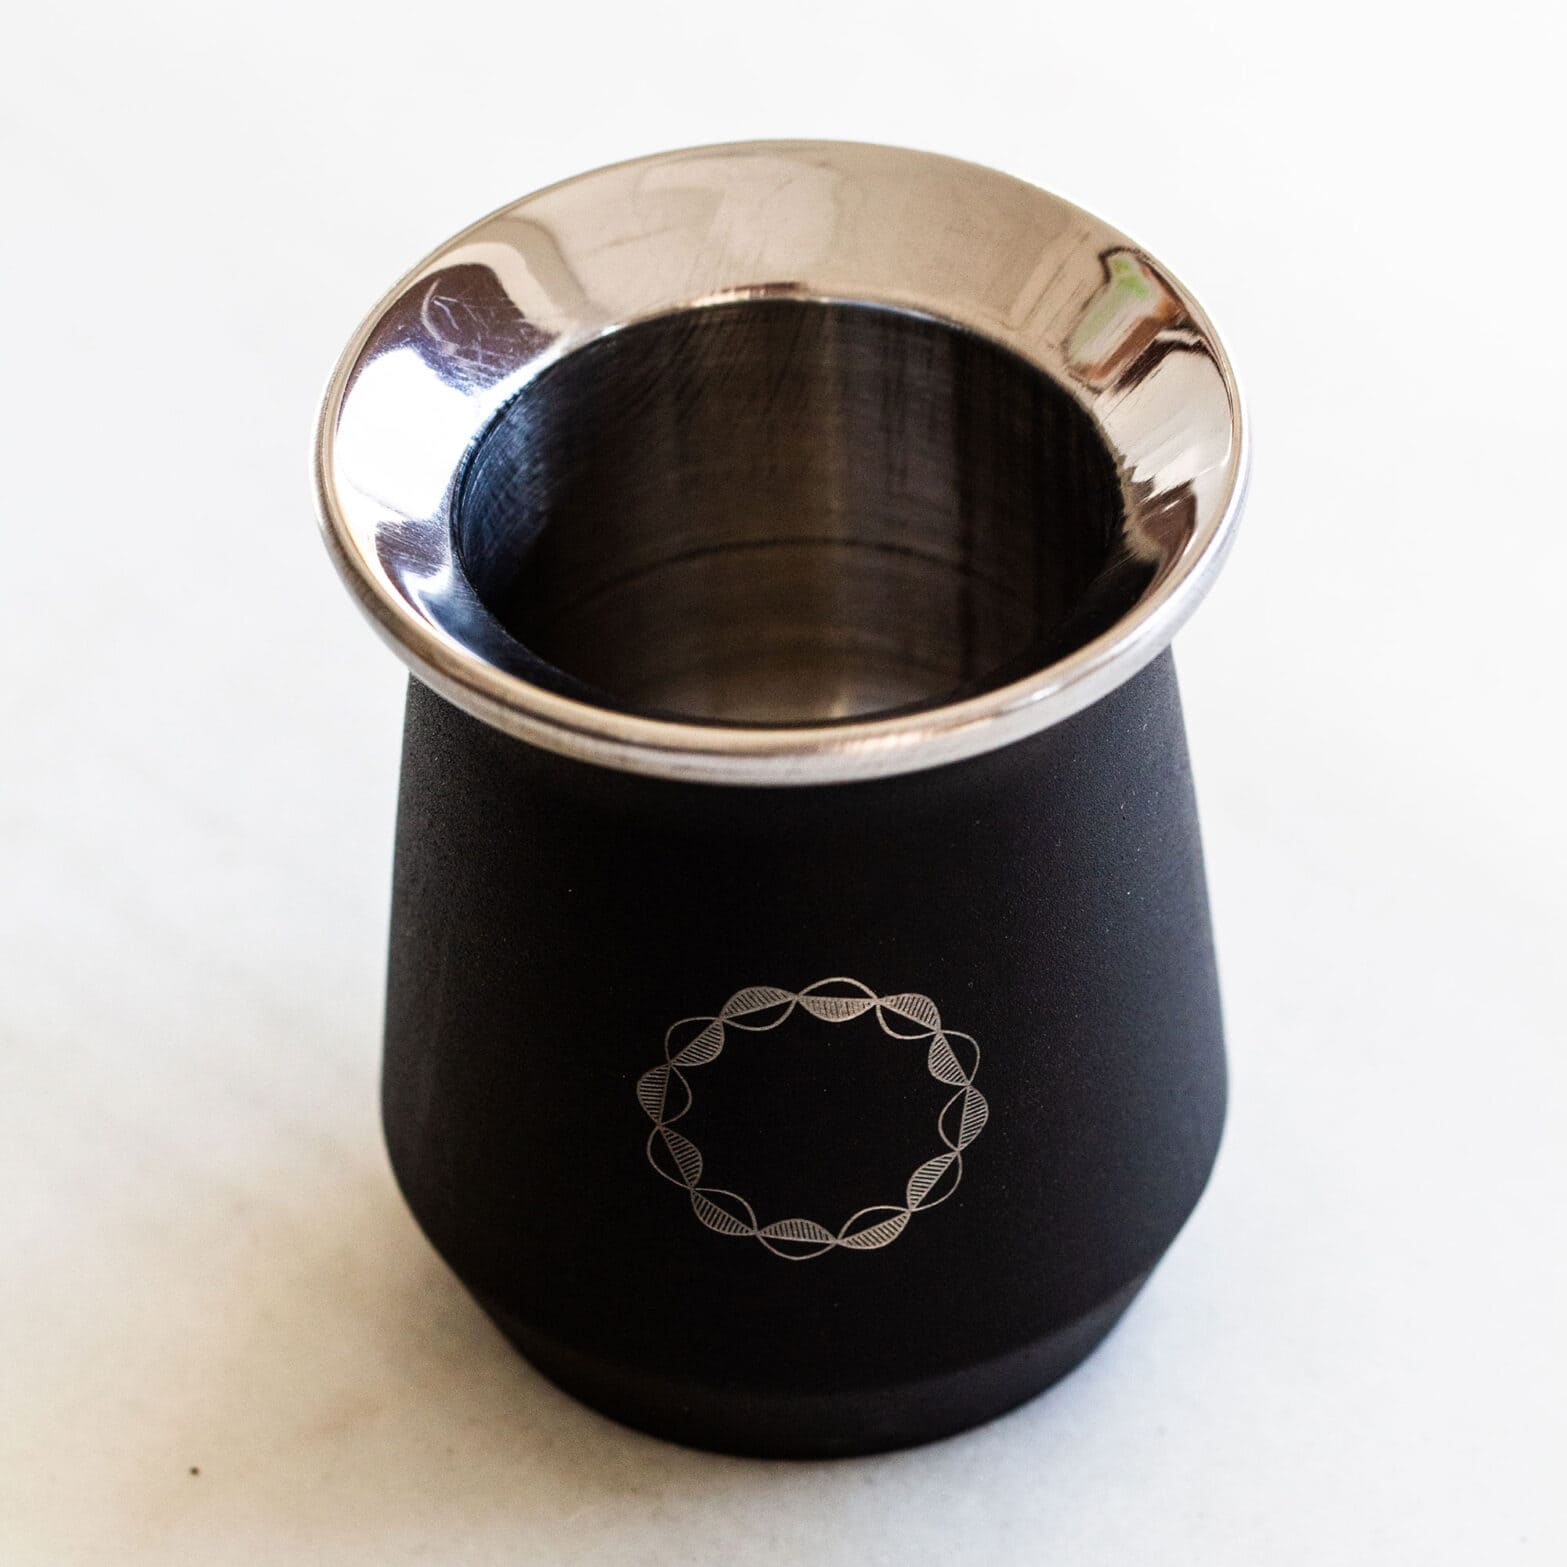 Night Infinity Cup - 22g, 6oz Capacity - Double Walled Stainless Steel Mate Cup - Matte Black Colorway